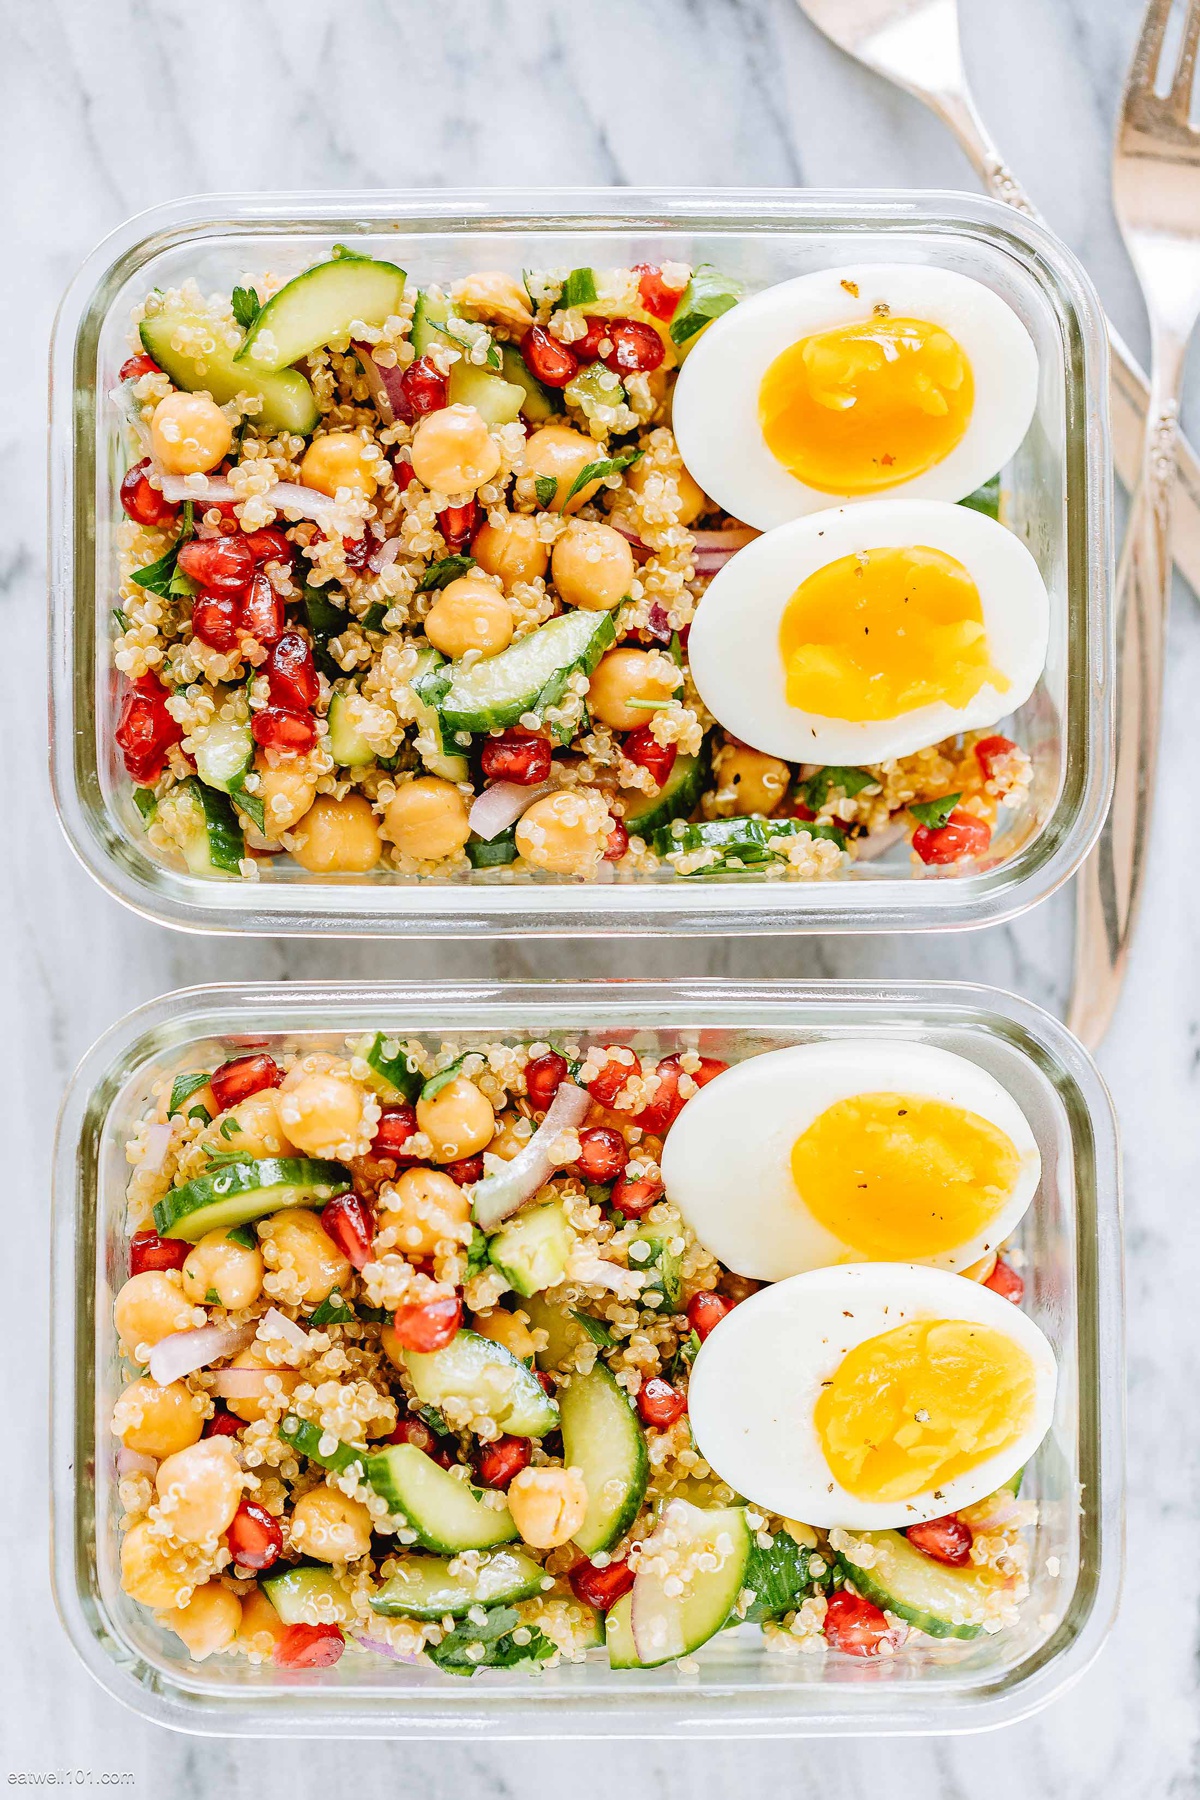 Chickpea salad with eggs in meal prep containers.